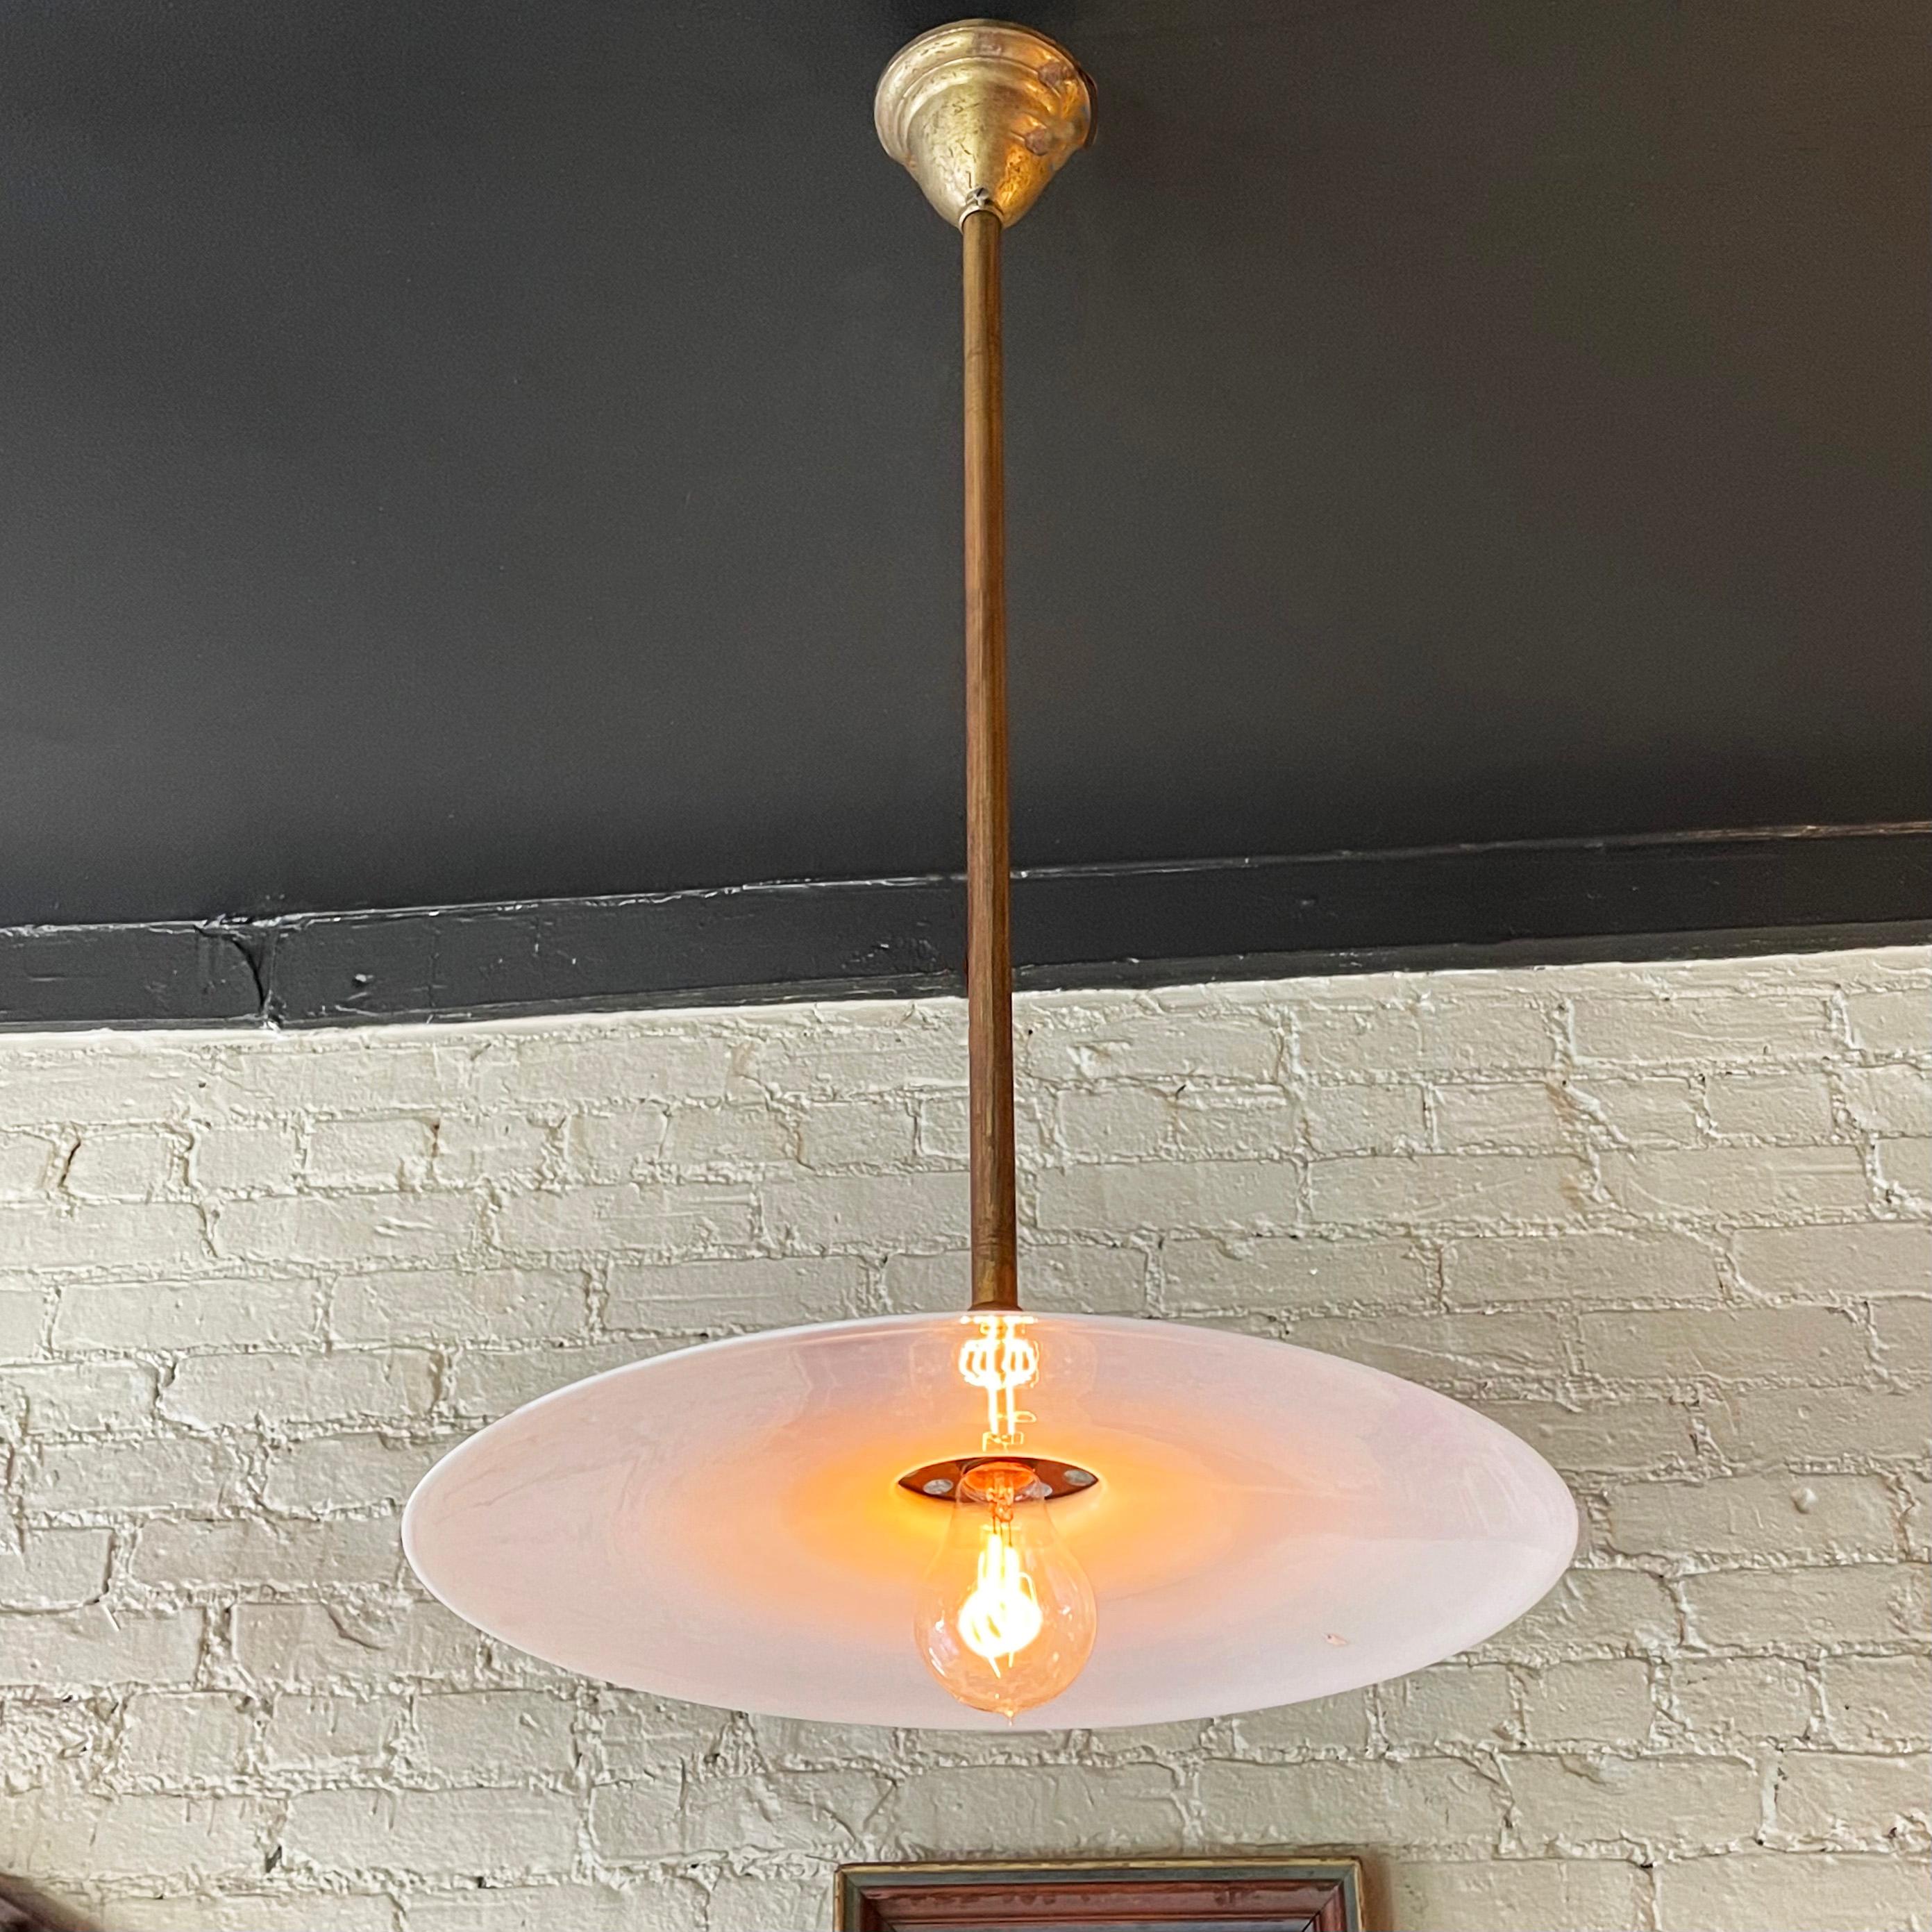 Early 20th century, industrial pendant light features a large, opaque, milk glass disc shade on a patinated brass pole with brass canopy and paddle switch hardware.